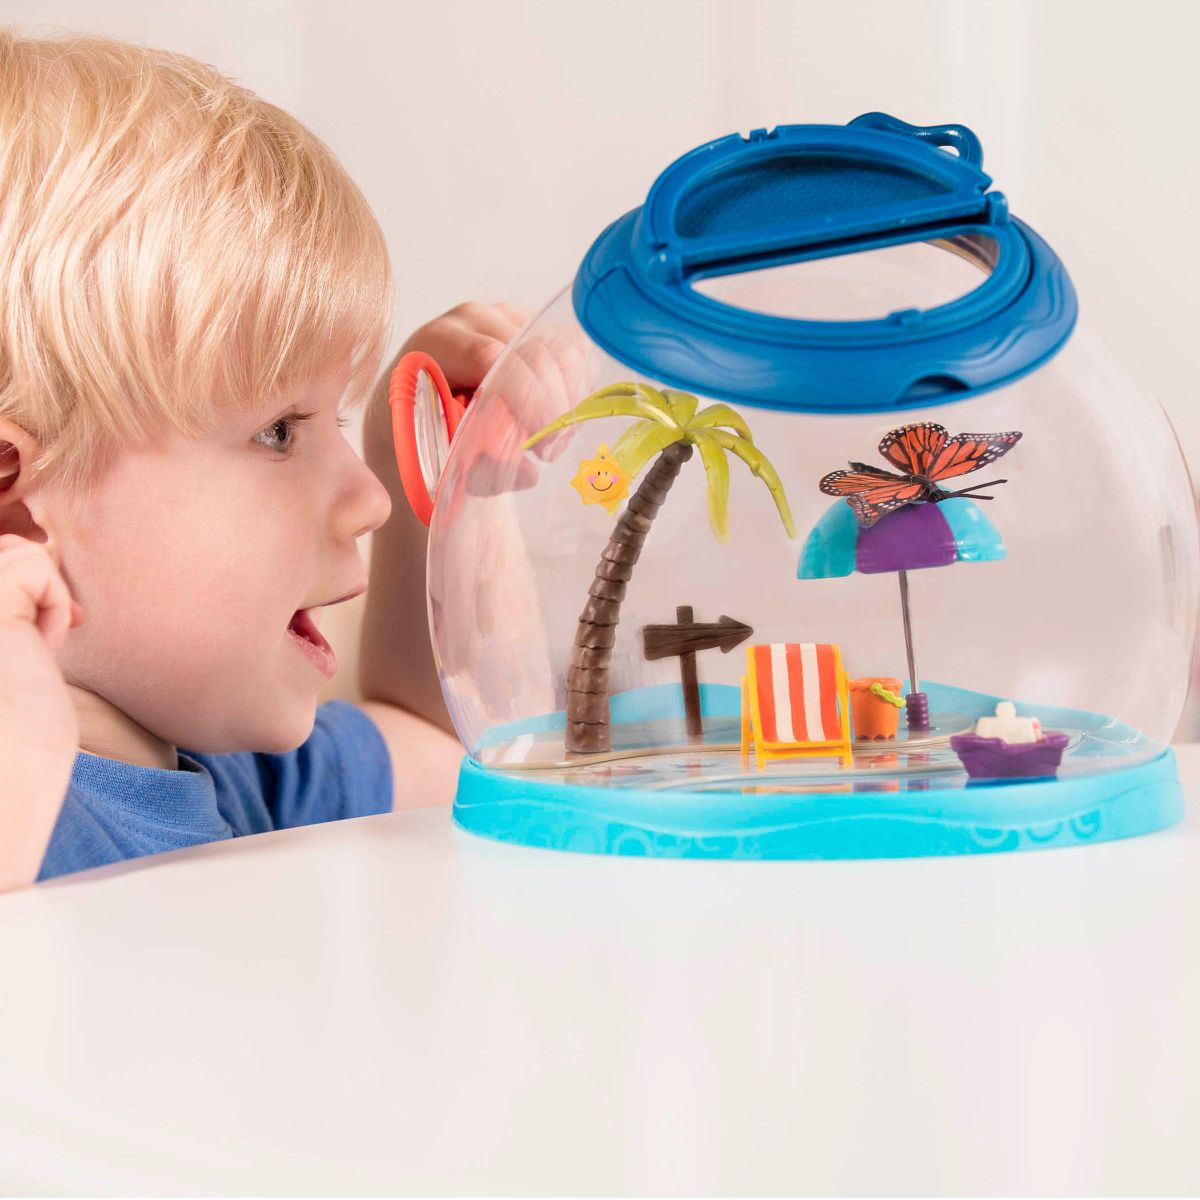 Tiki Retreat Insect Catcher Toy Discover Set with Bug House & Magnifier,  Ages 4+